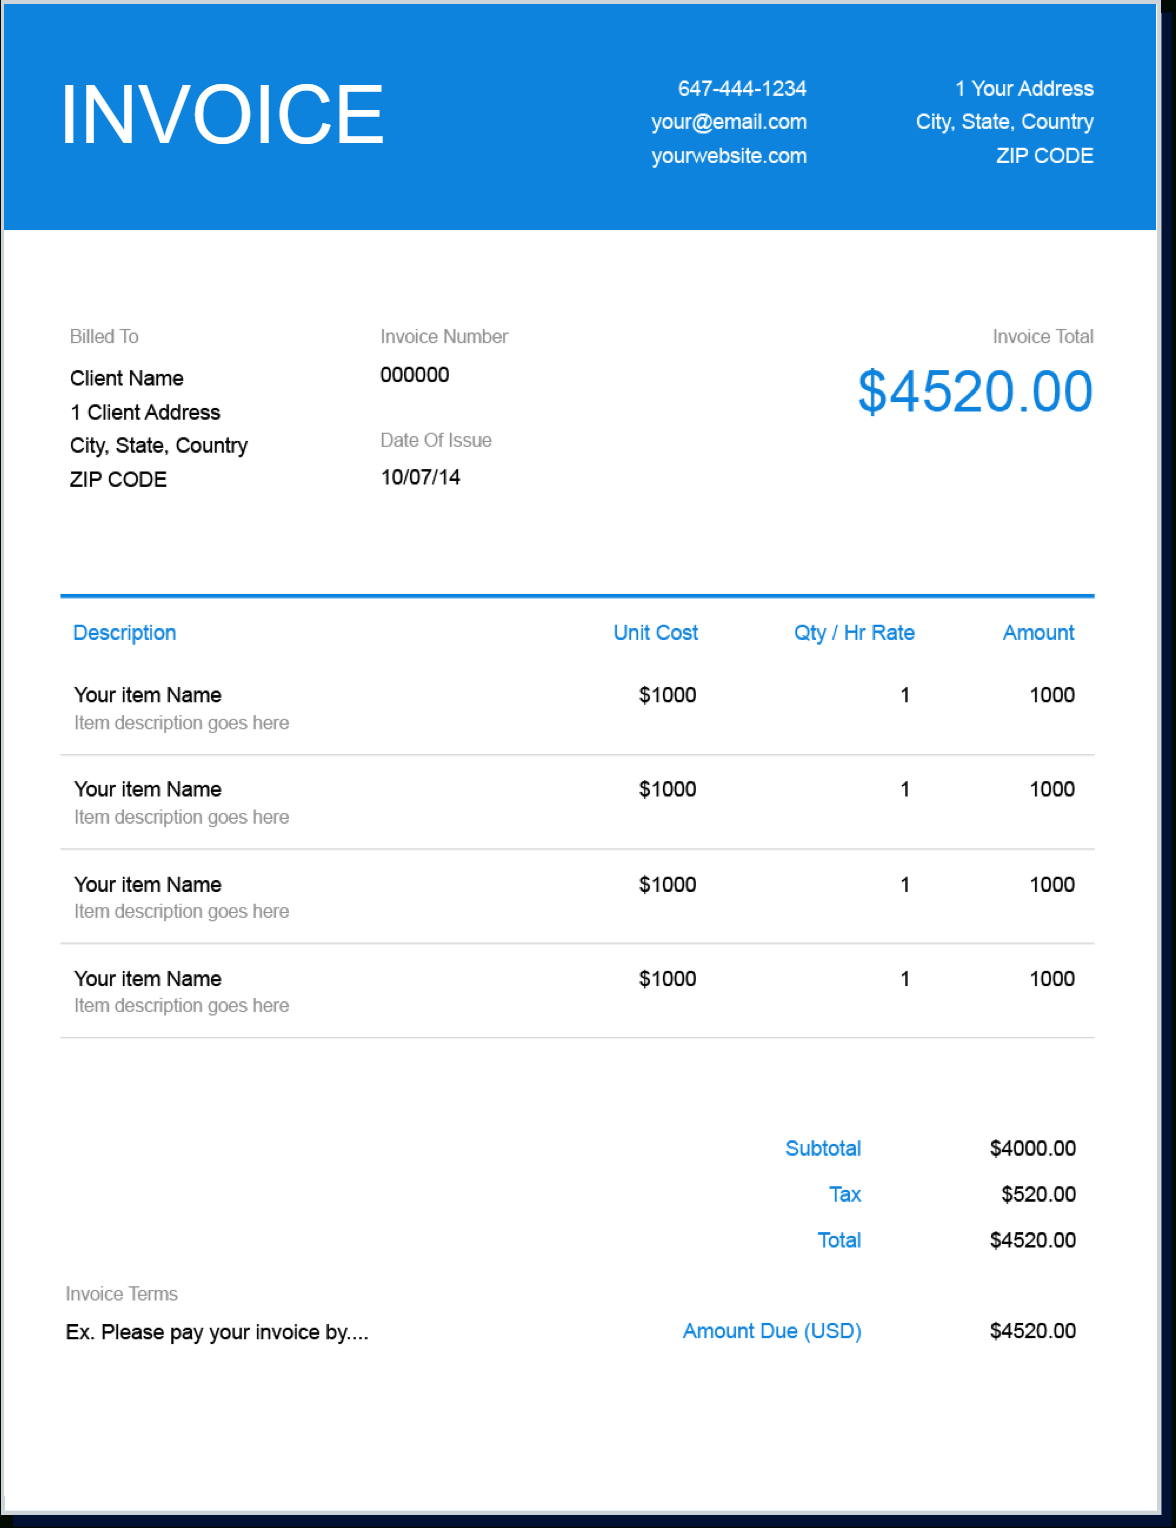 Invoice Template | Create And Send Free Invoices Instantly With Web Design Invoice Template Word